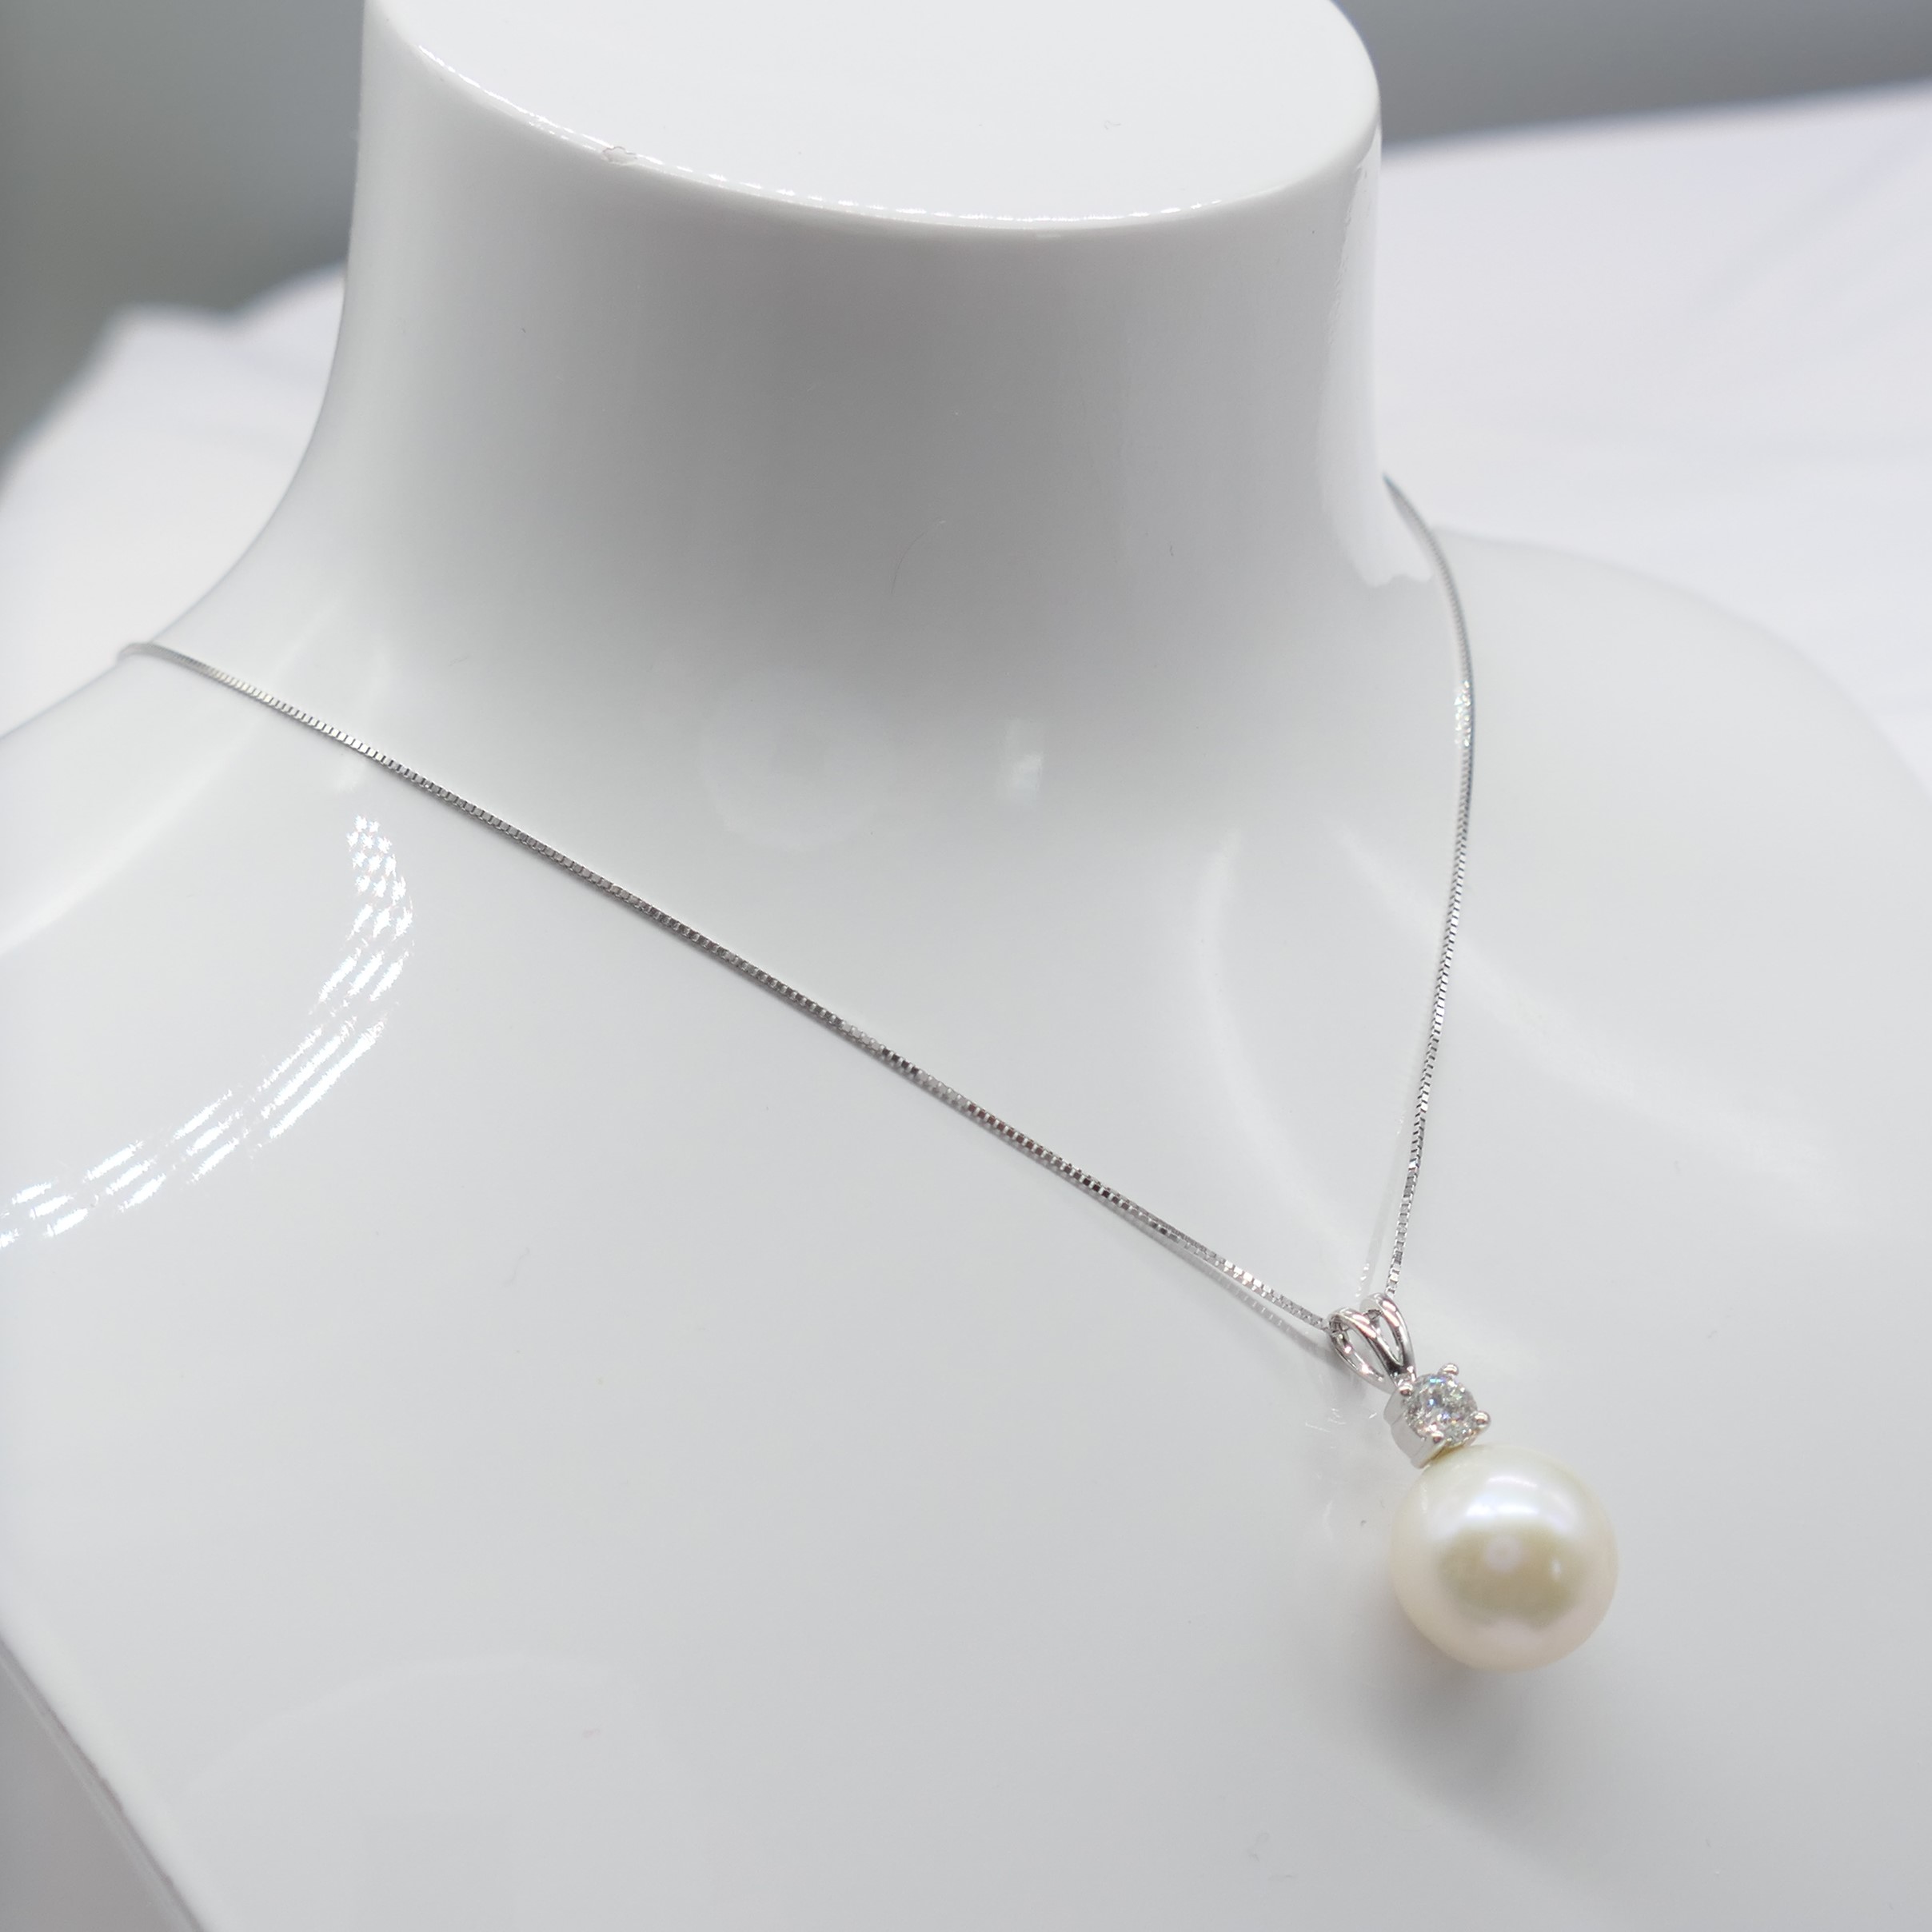 White Gold Freshwater Pearl and Diamond Necklace - Image 6 of 6